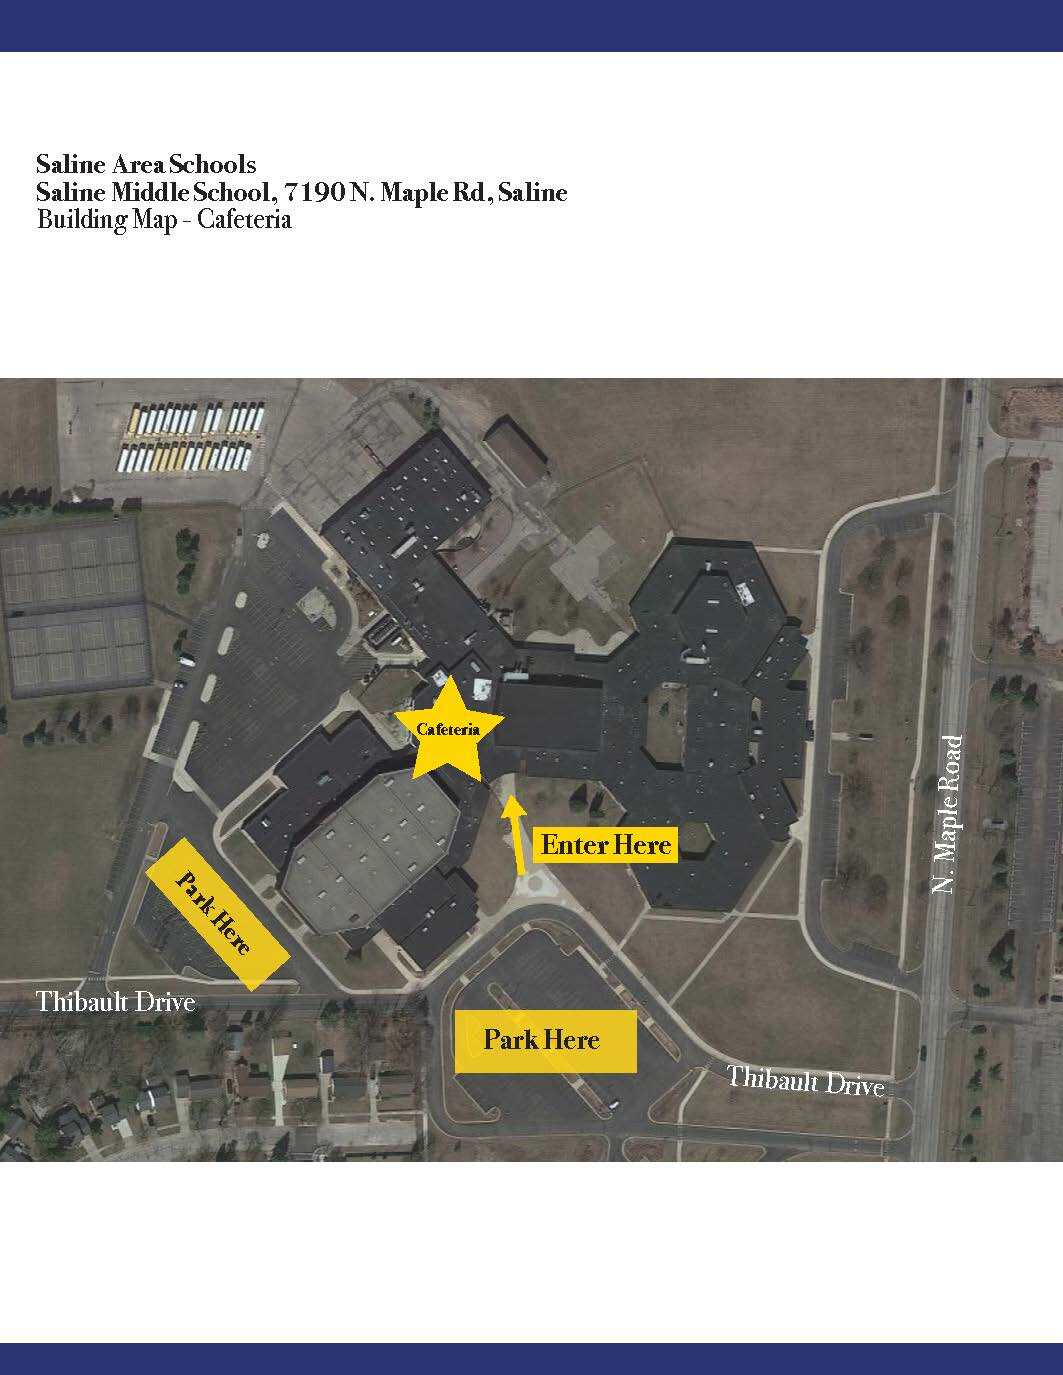 MS Map Cafeteria Parking